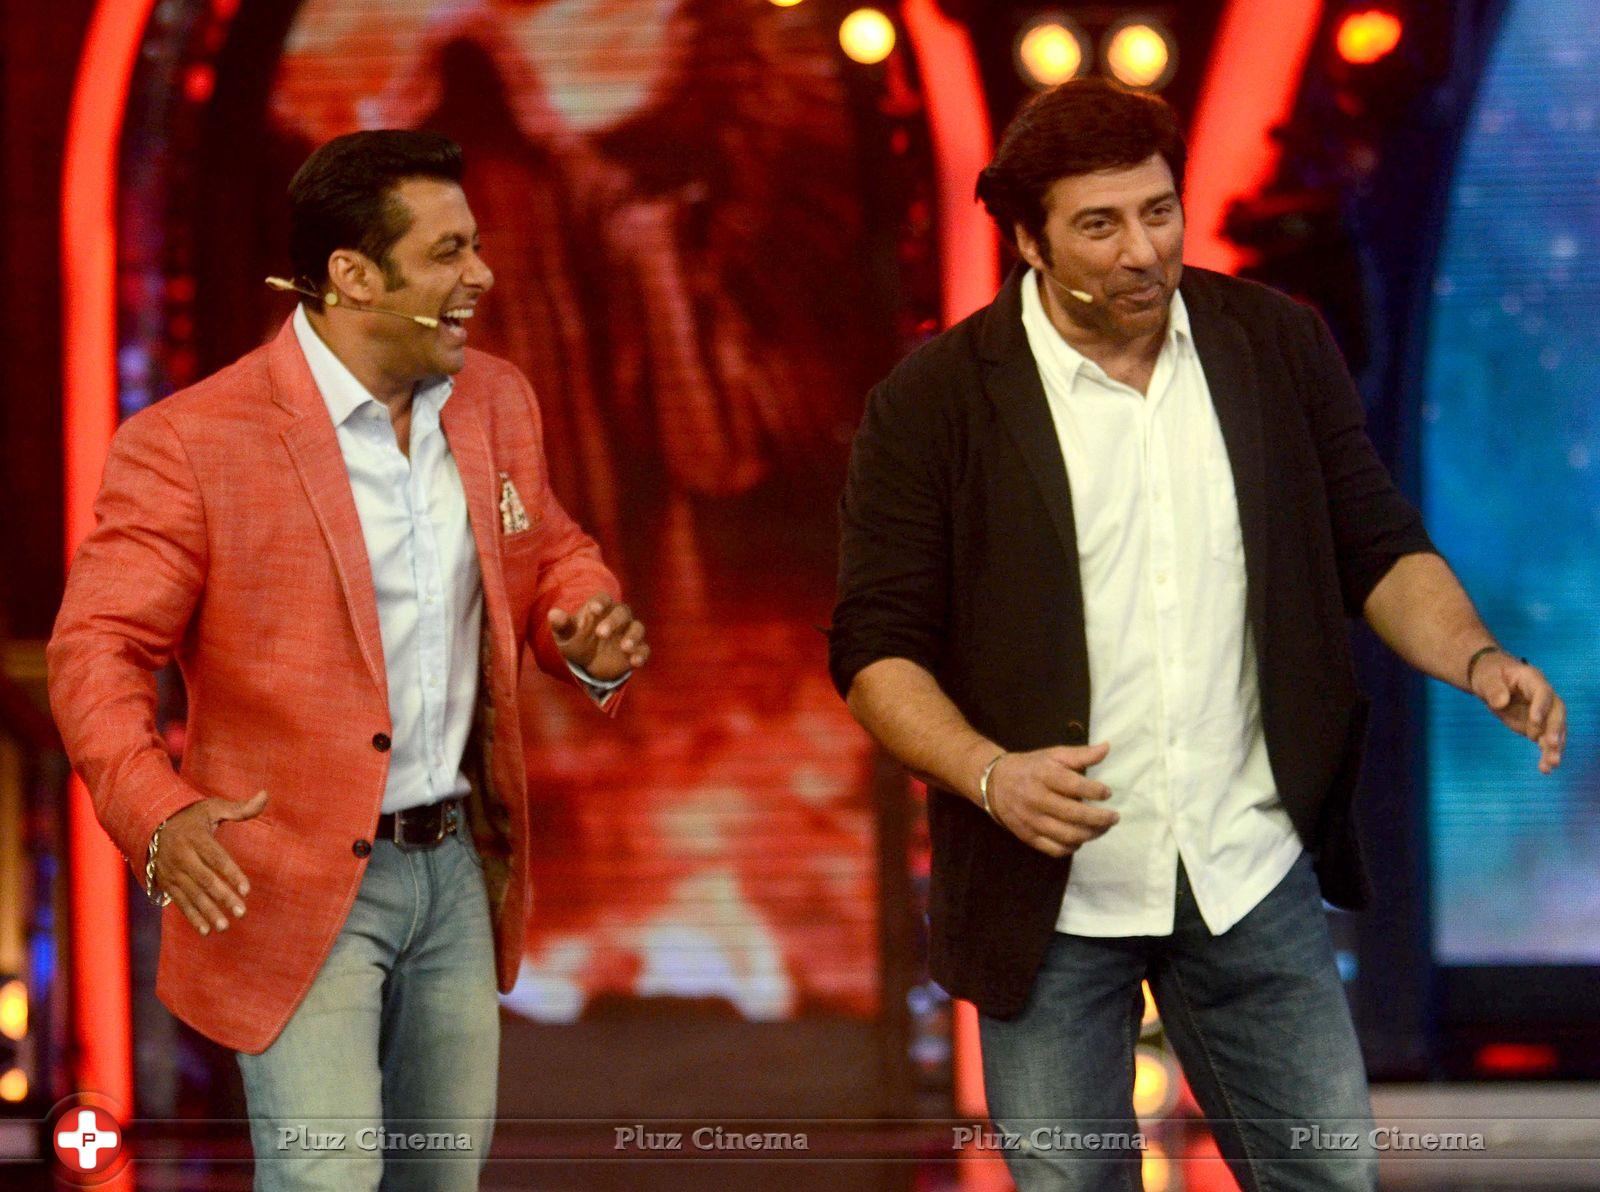 Sunny Deol promotes his film Singh Sahab The Great on the sets of Big Boss With Salman Khan Photos | Picture 633378